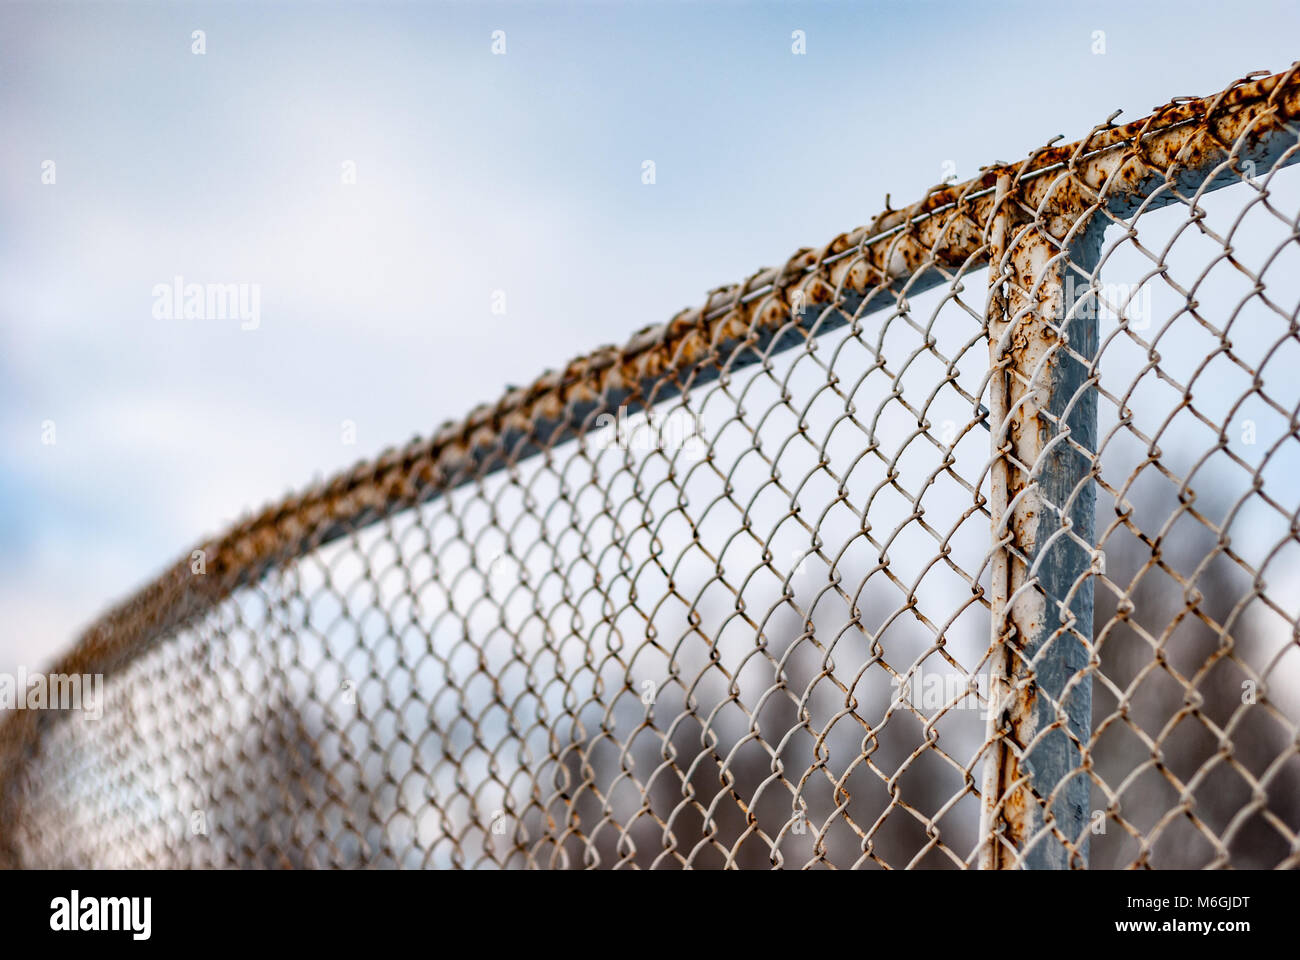 Rusty metal mesh fence on the background of sky and trees. Hockey rink fencing Stock Photo